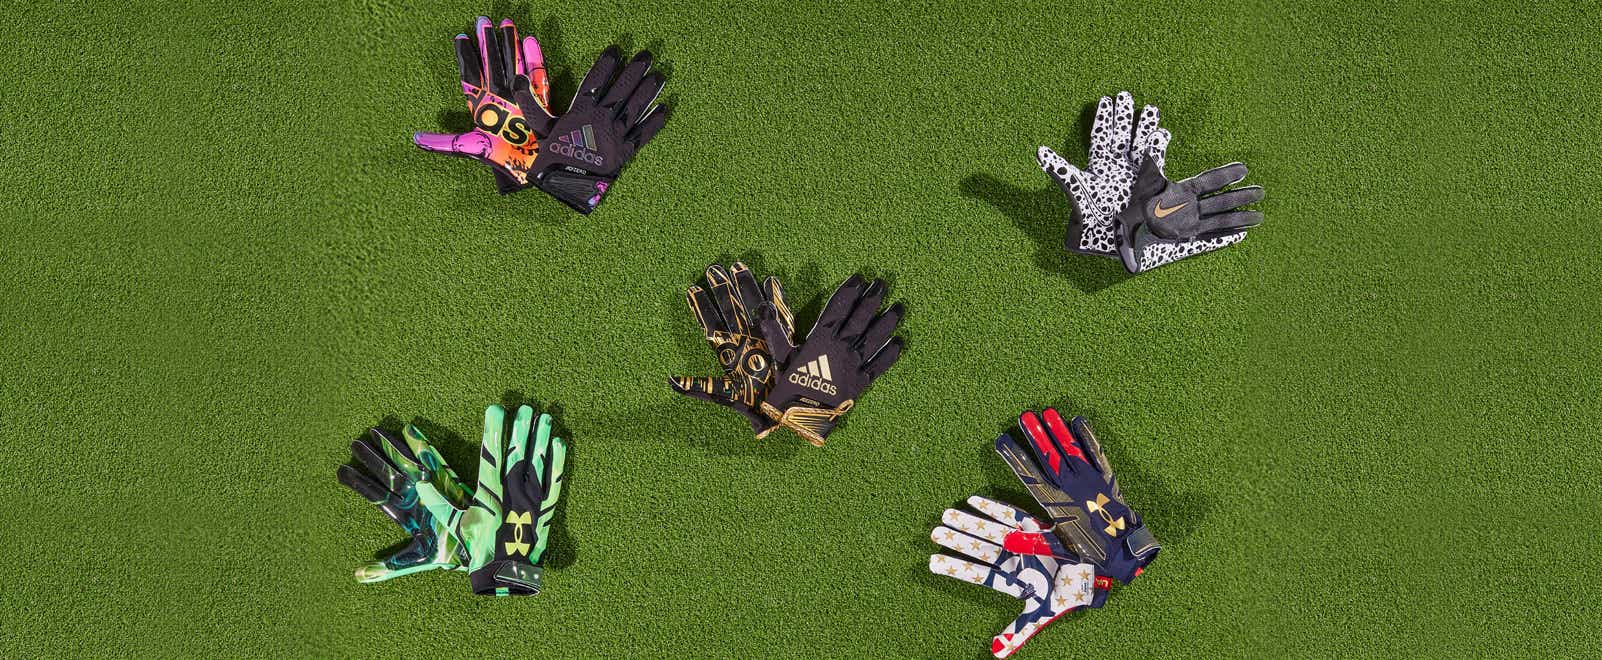 How to Dry Football Gloves